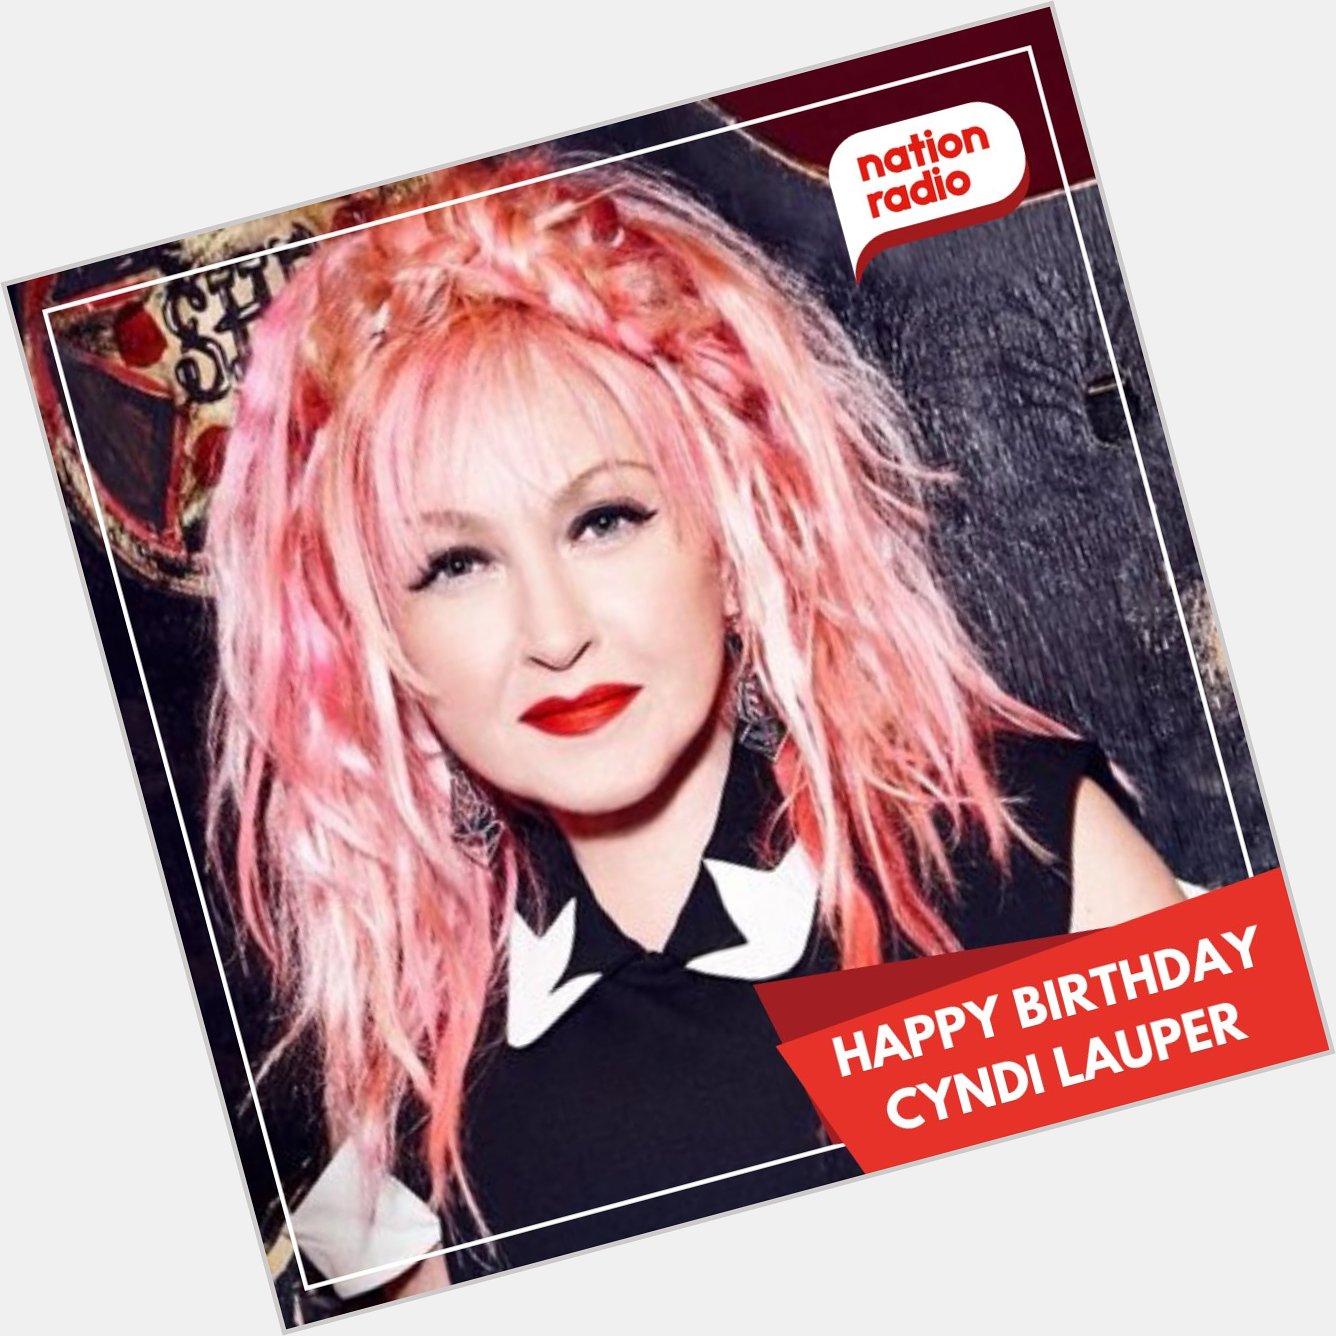 Wishing Cyndi Lauper a happy 67th birthday. What\s your favourite track of hers? 